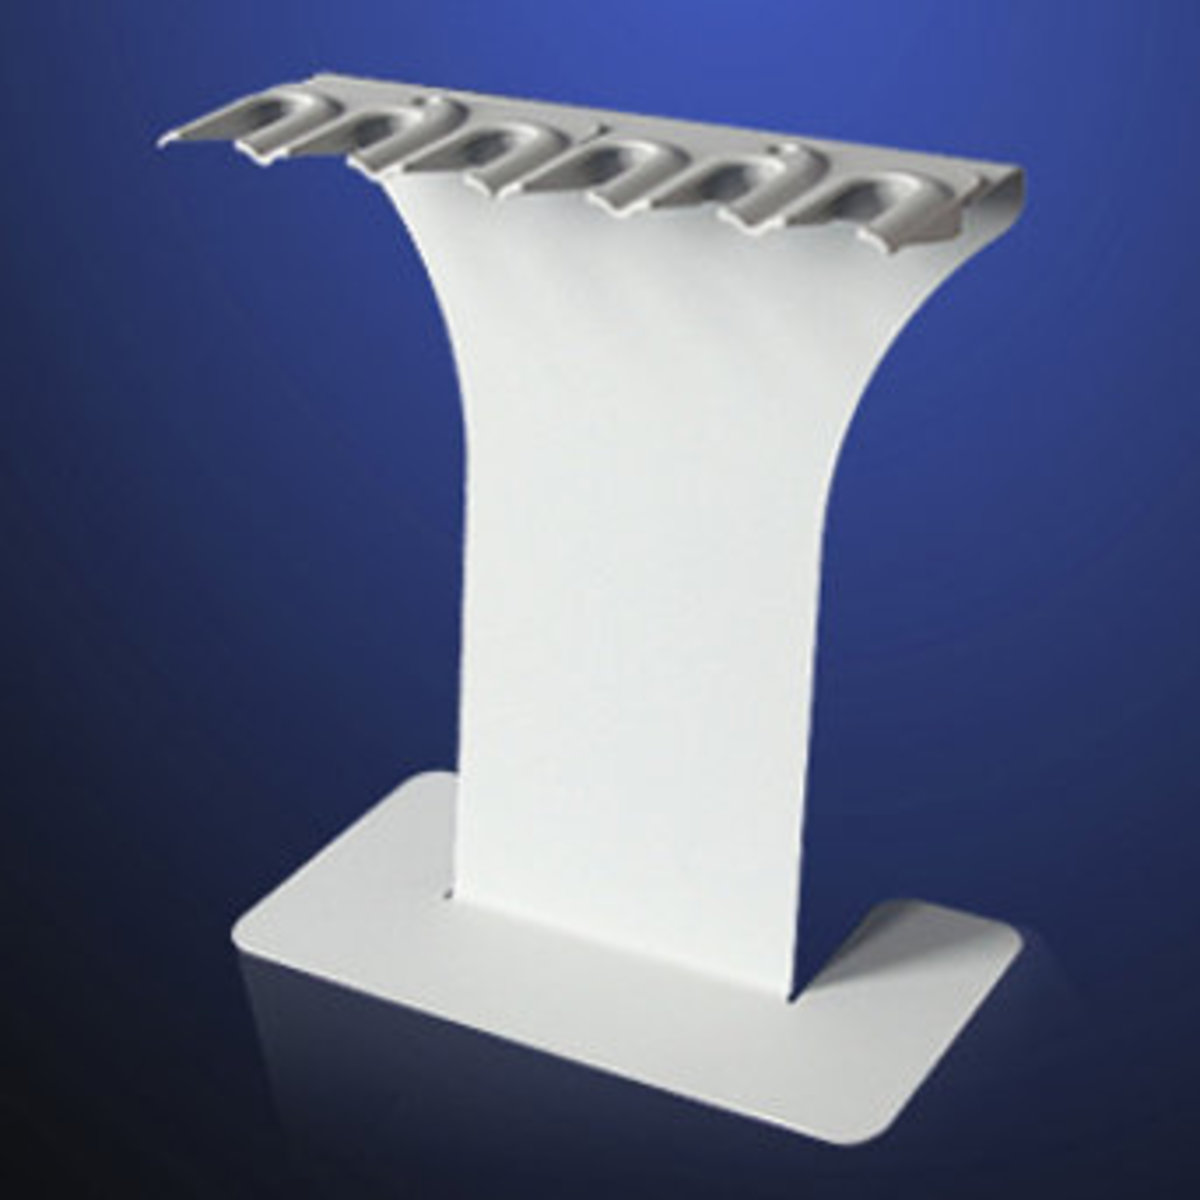 UNIVERSAL LINEAR RACK FOR SIX PIPETTES